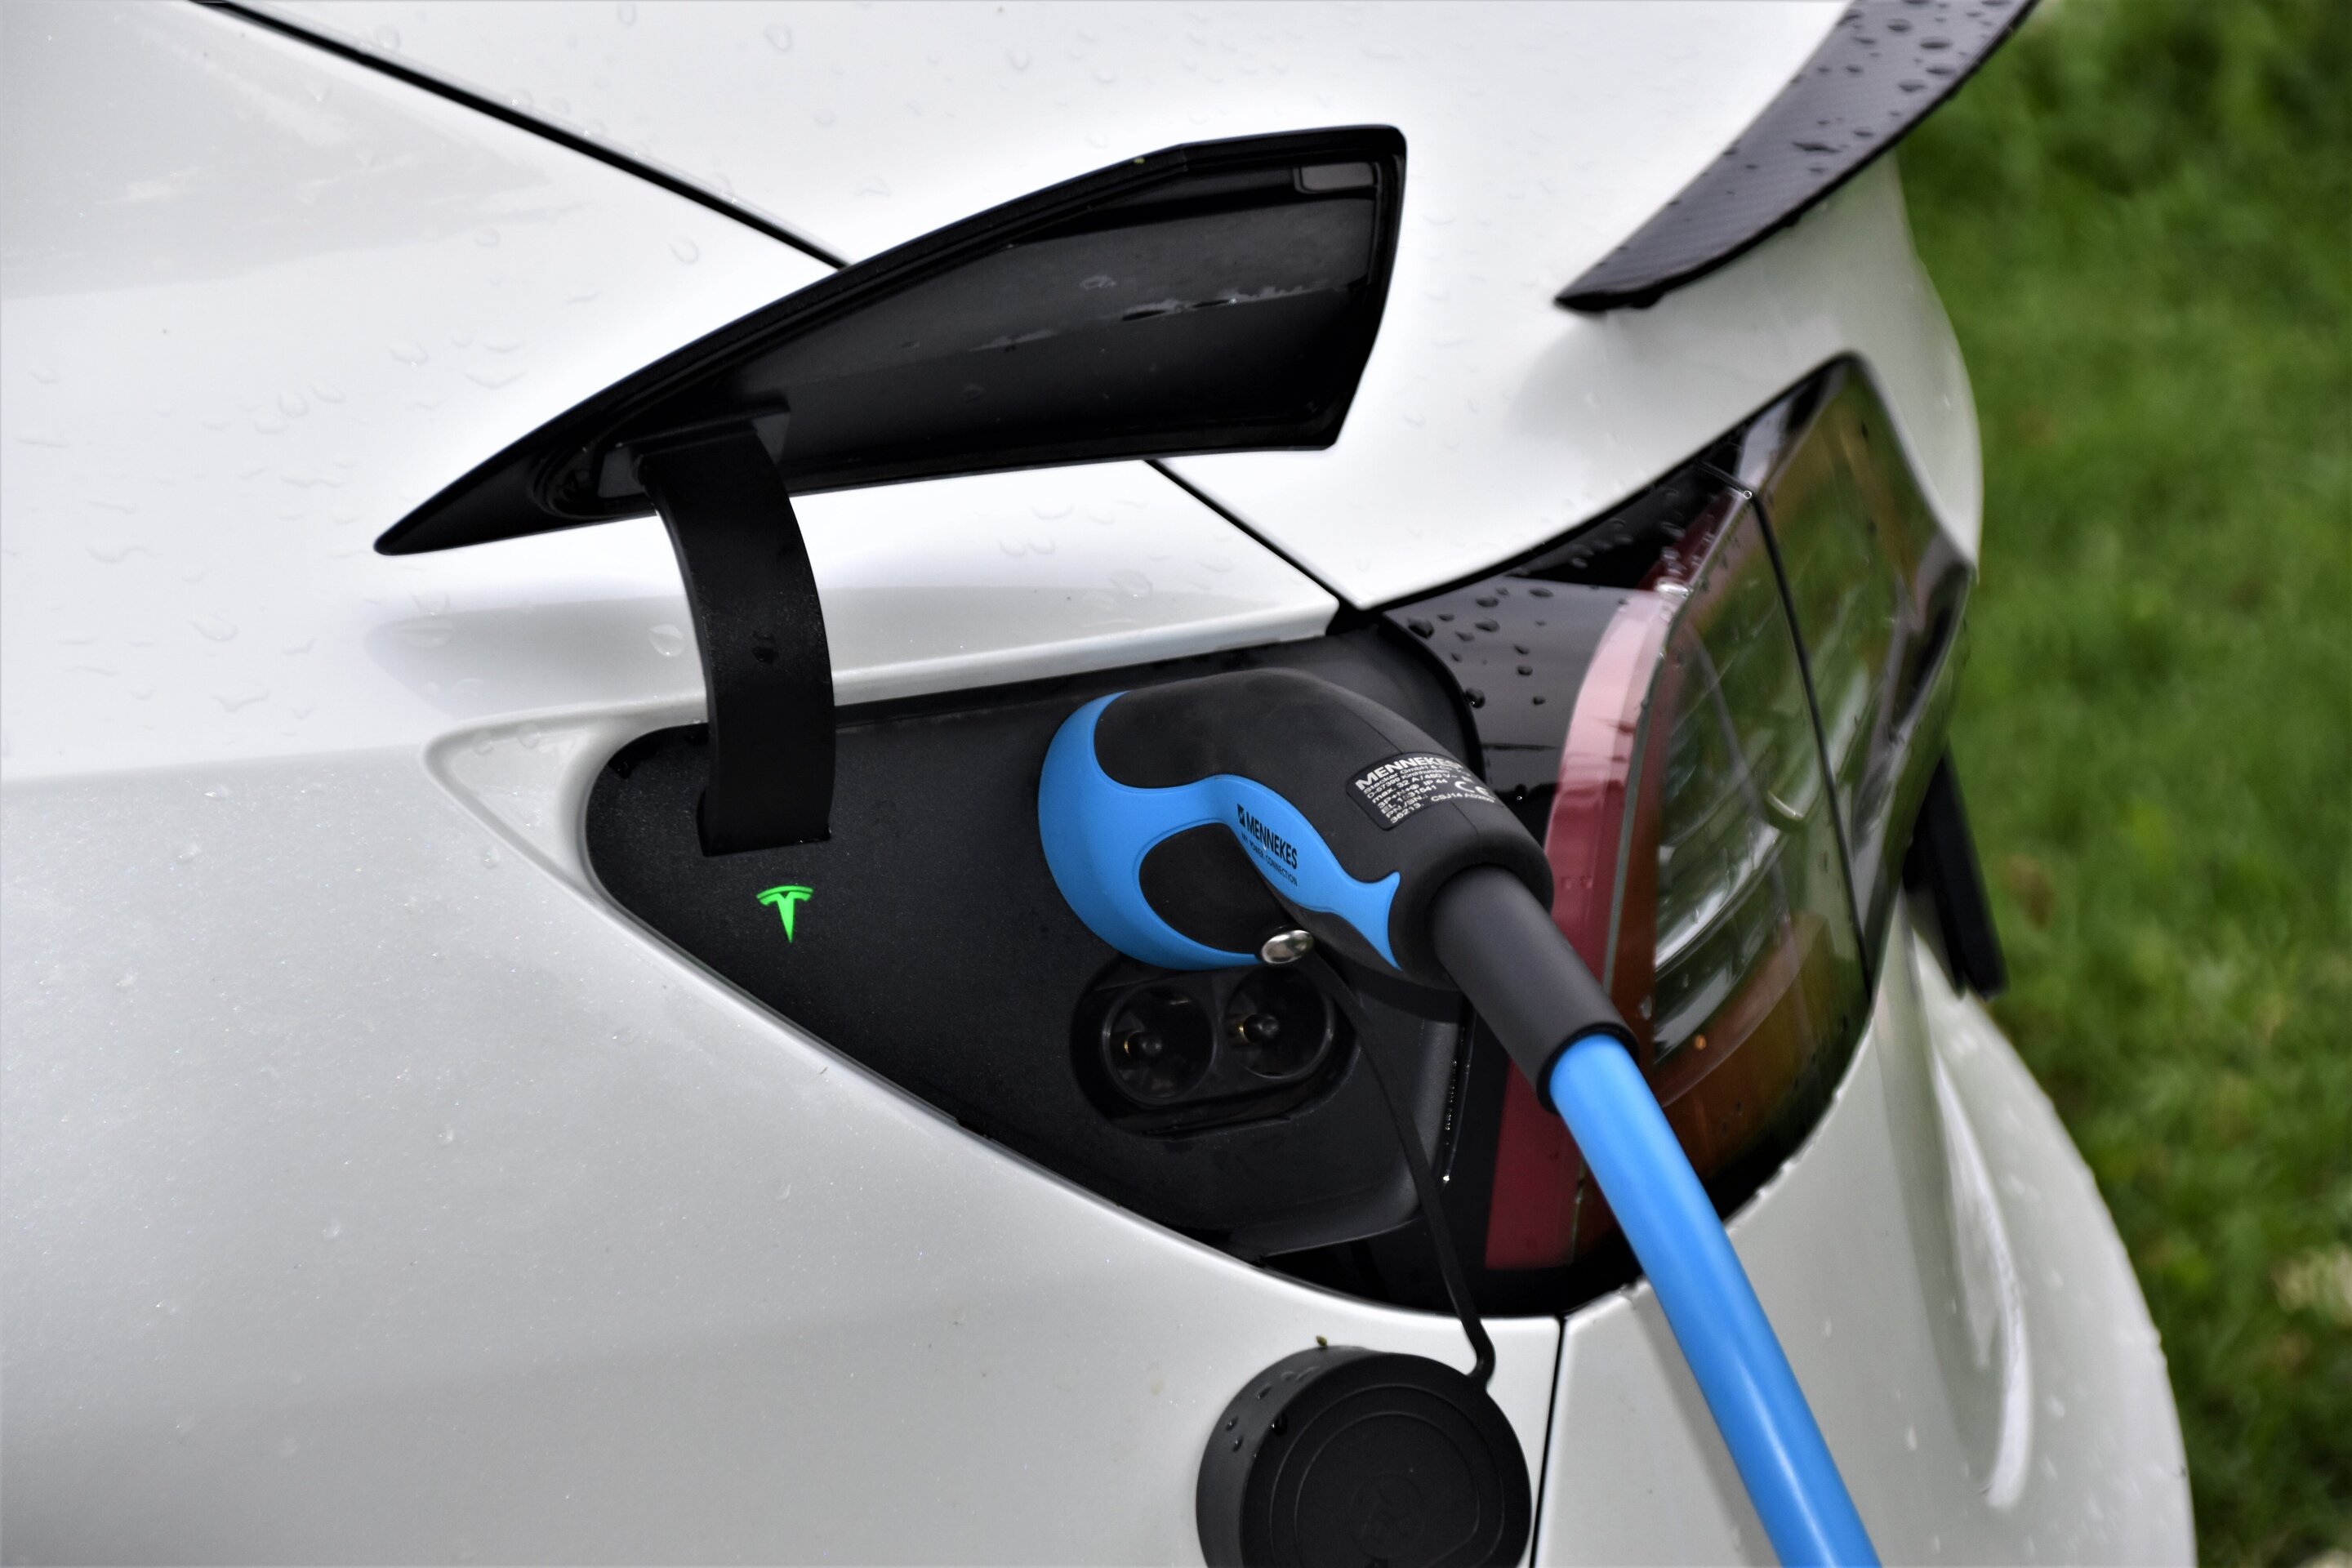 The biggest barrier to a vibrant second-hand electric vehicle market? Price